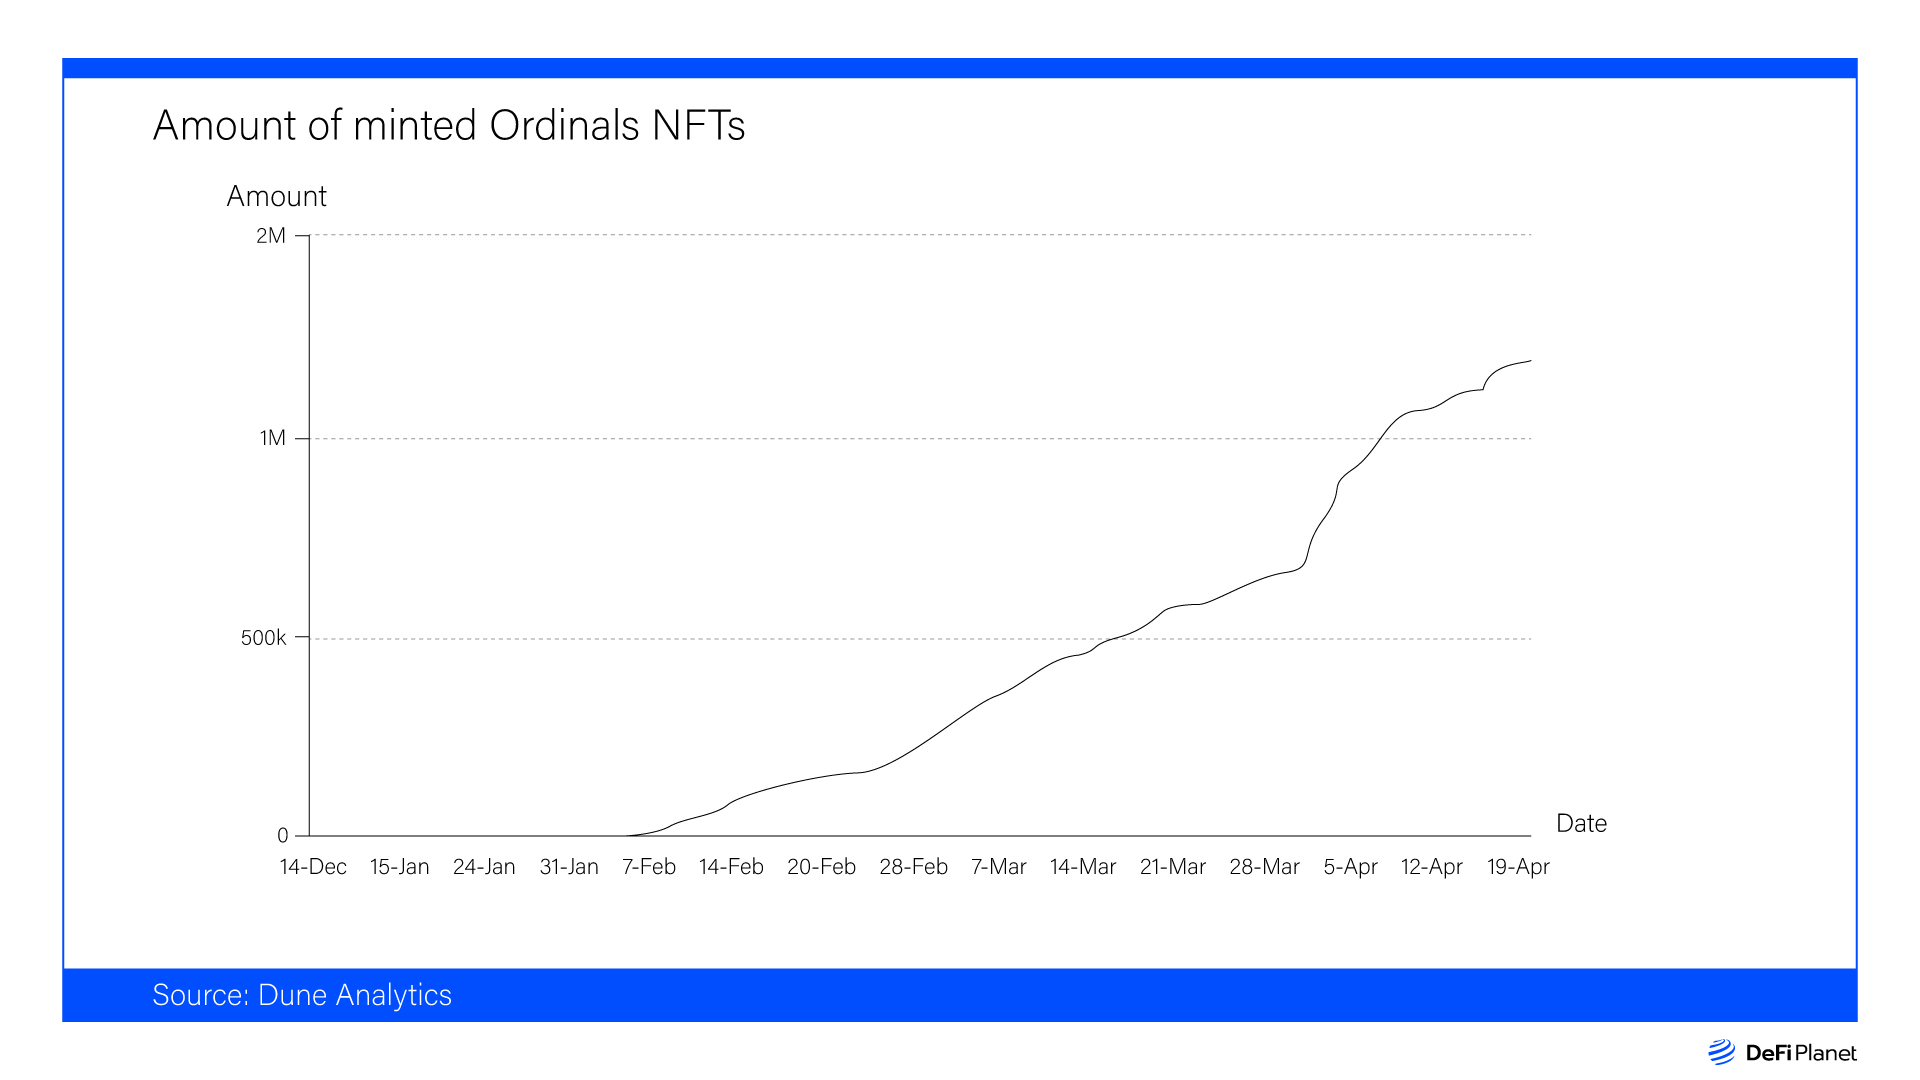 Amount-of-minted-ordinals-NFTs on DeFi Planet